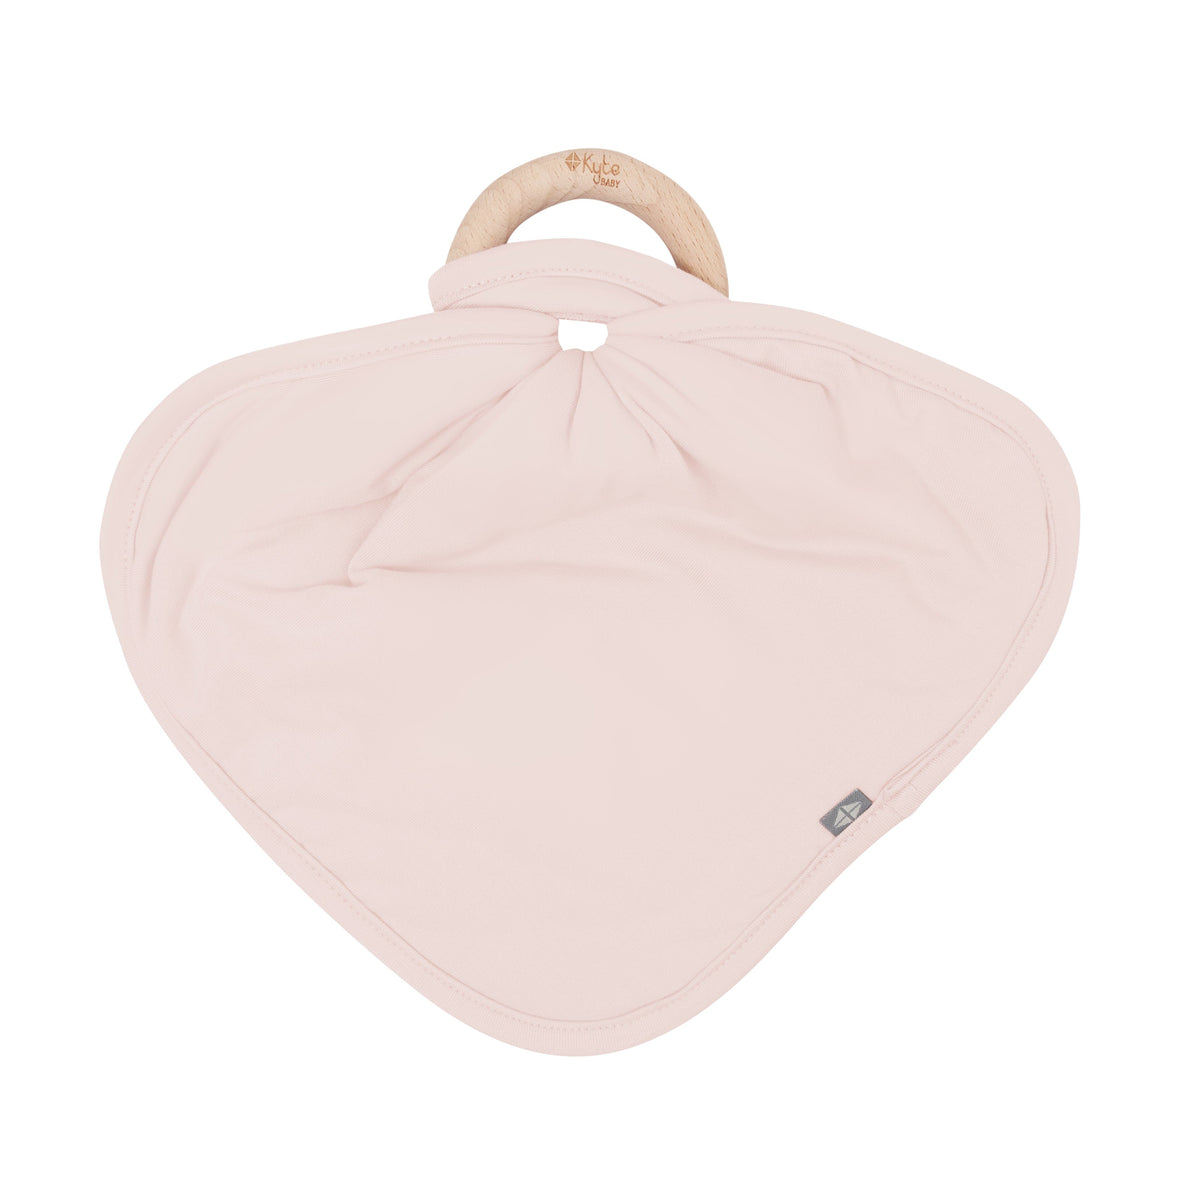 Kyte BABY Lovey Blush / Infant Lovey in Blush with Removable Wooden Teething Ring